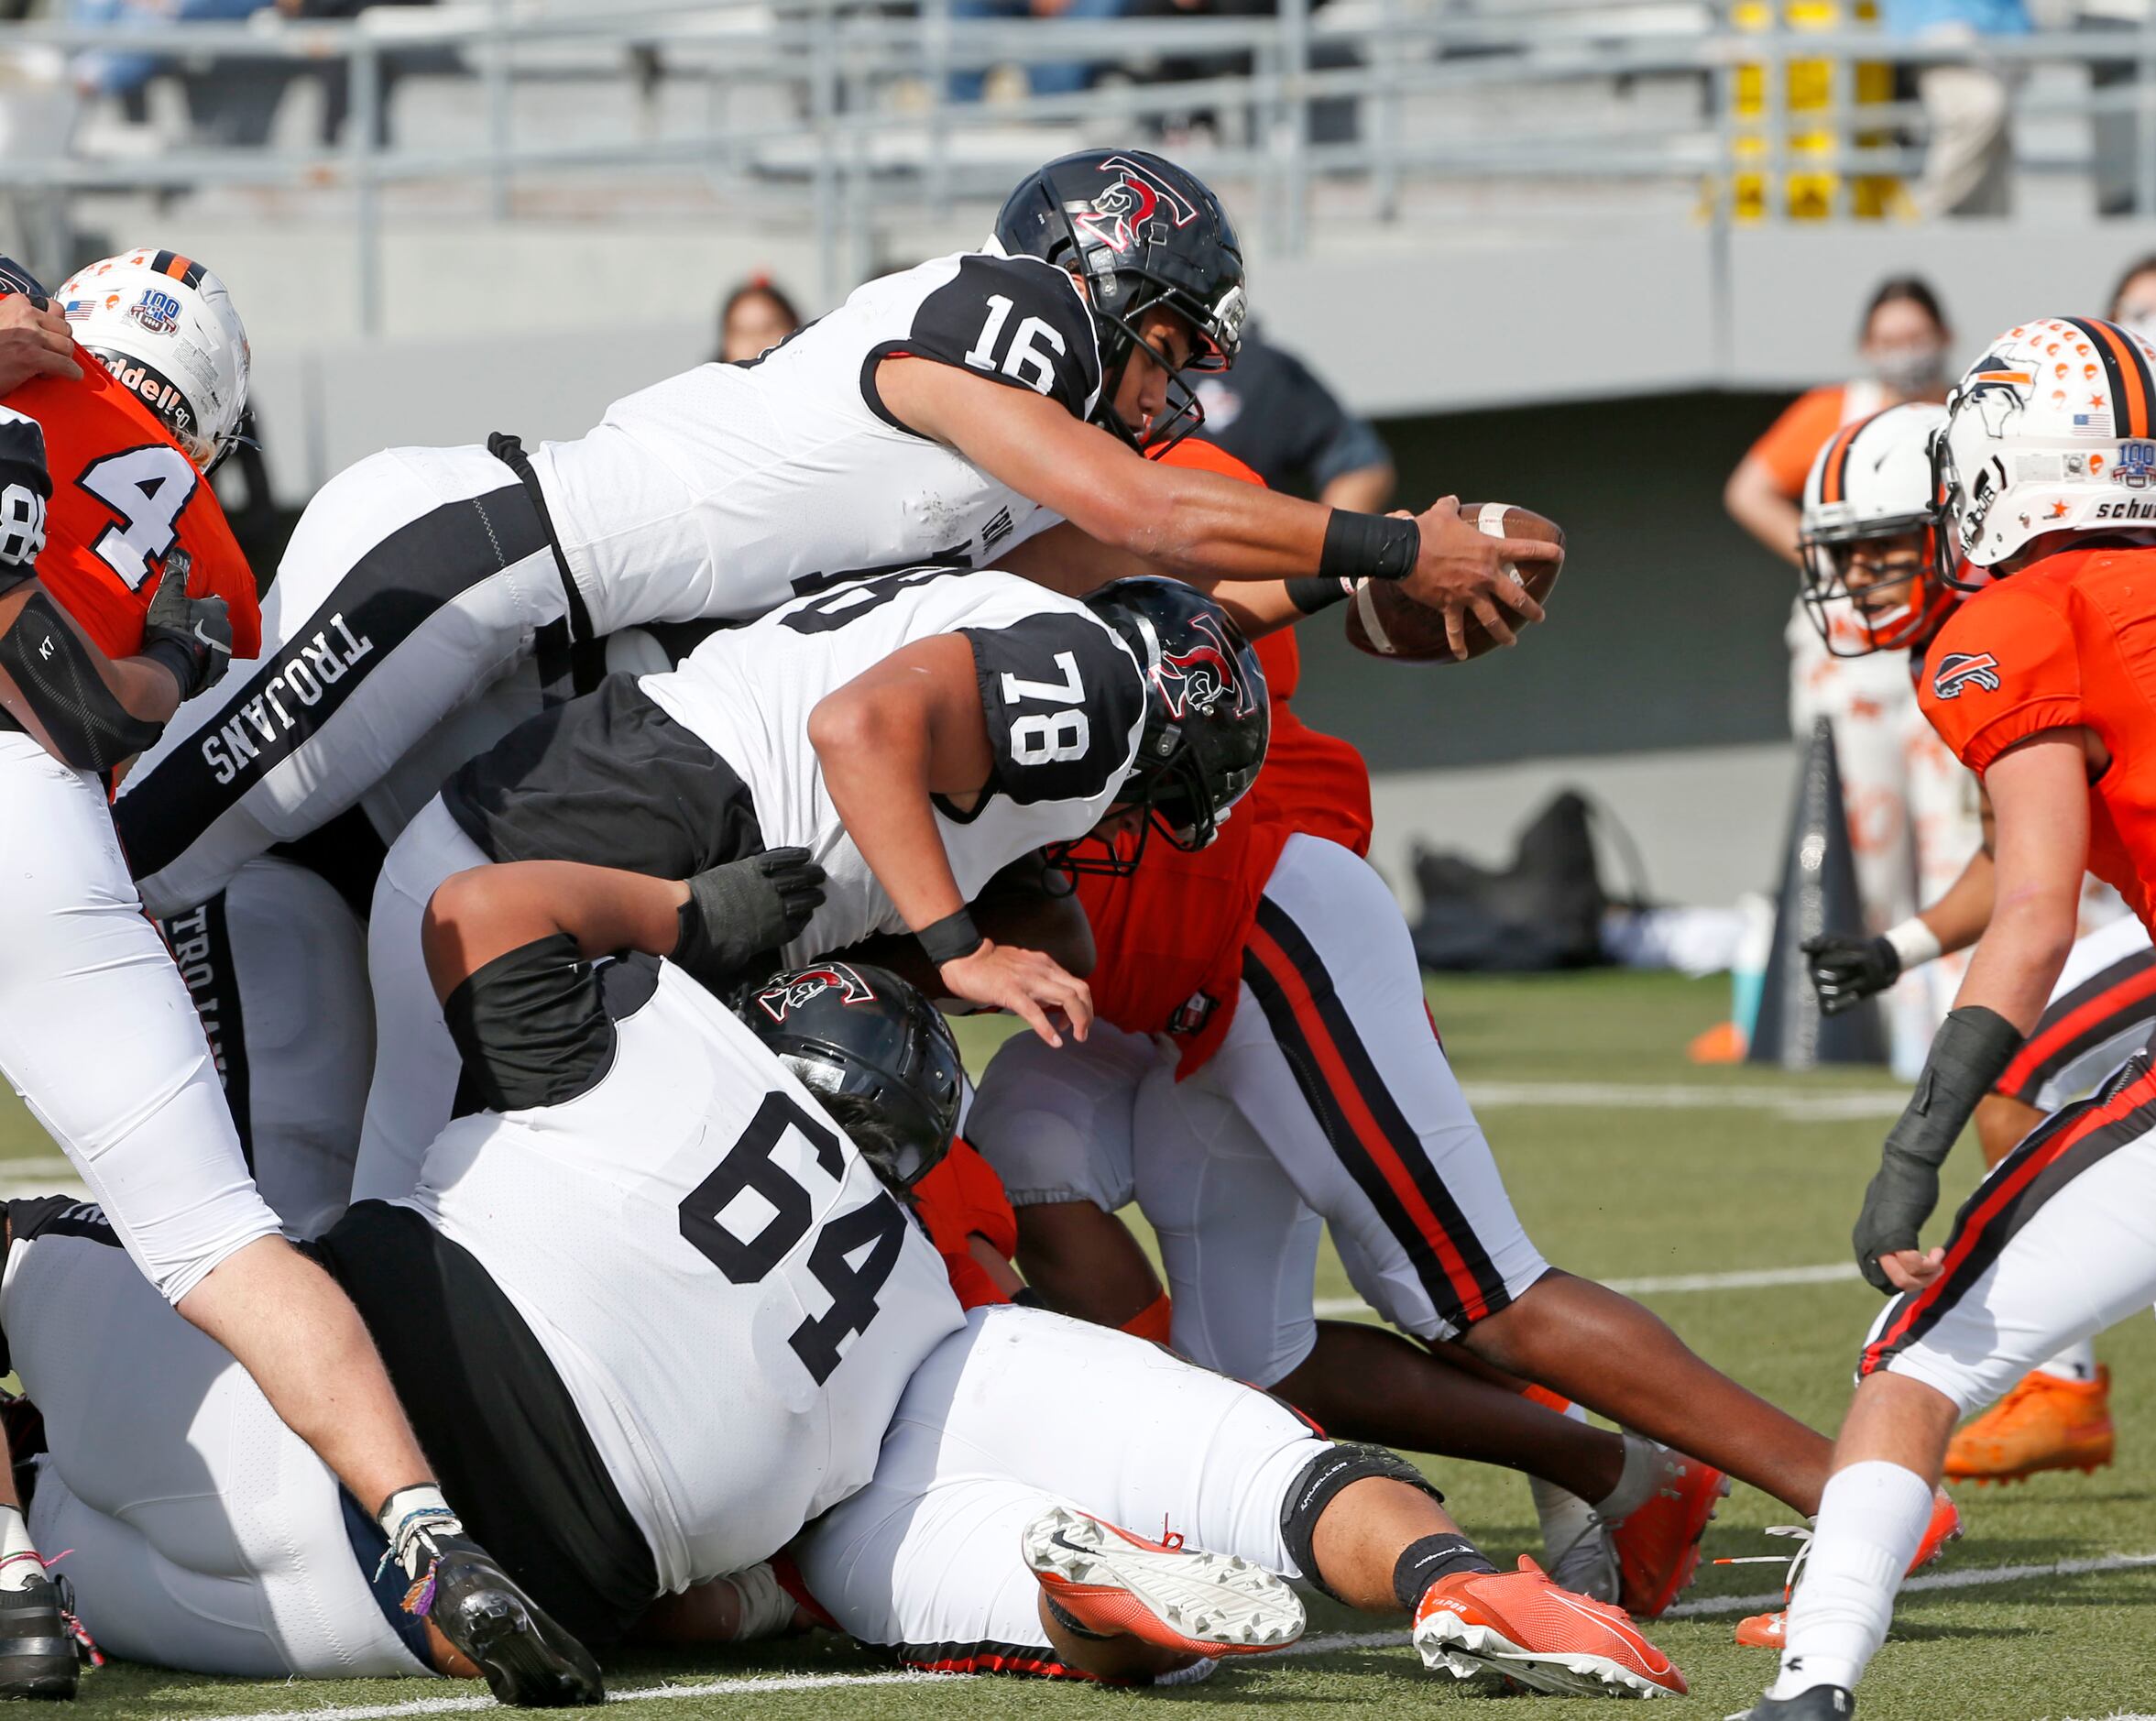 Euless Trinity quarterback Valentino Foni (16) sneaks the ball over Jacob Foni (78) and Save...